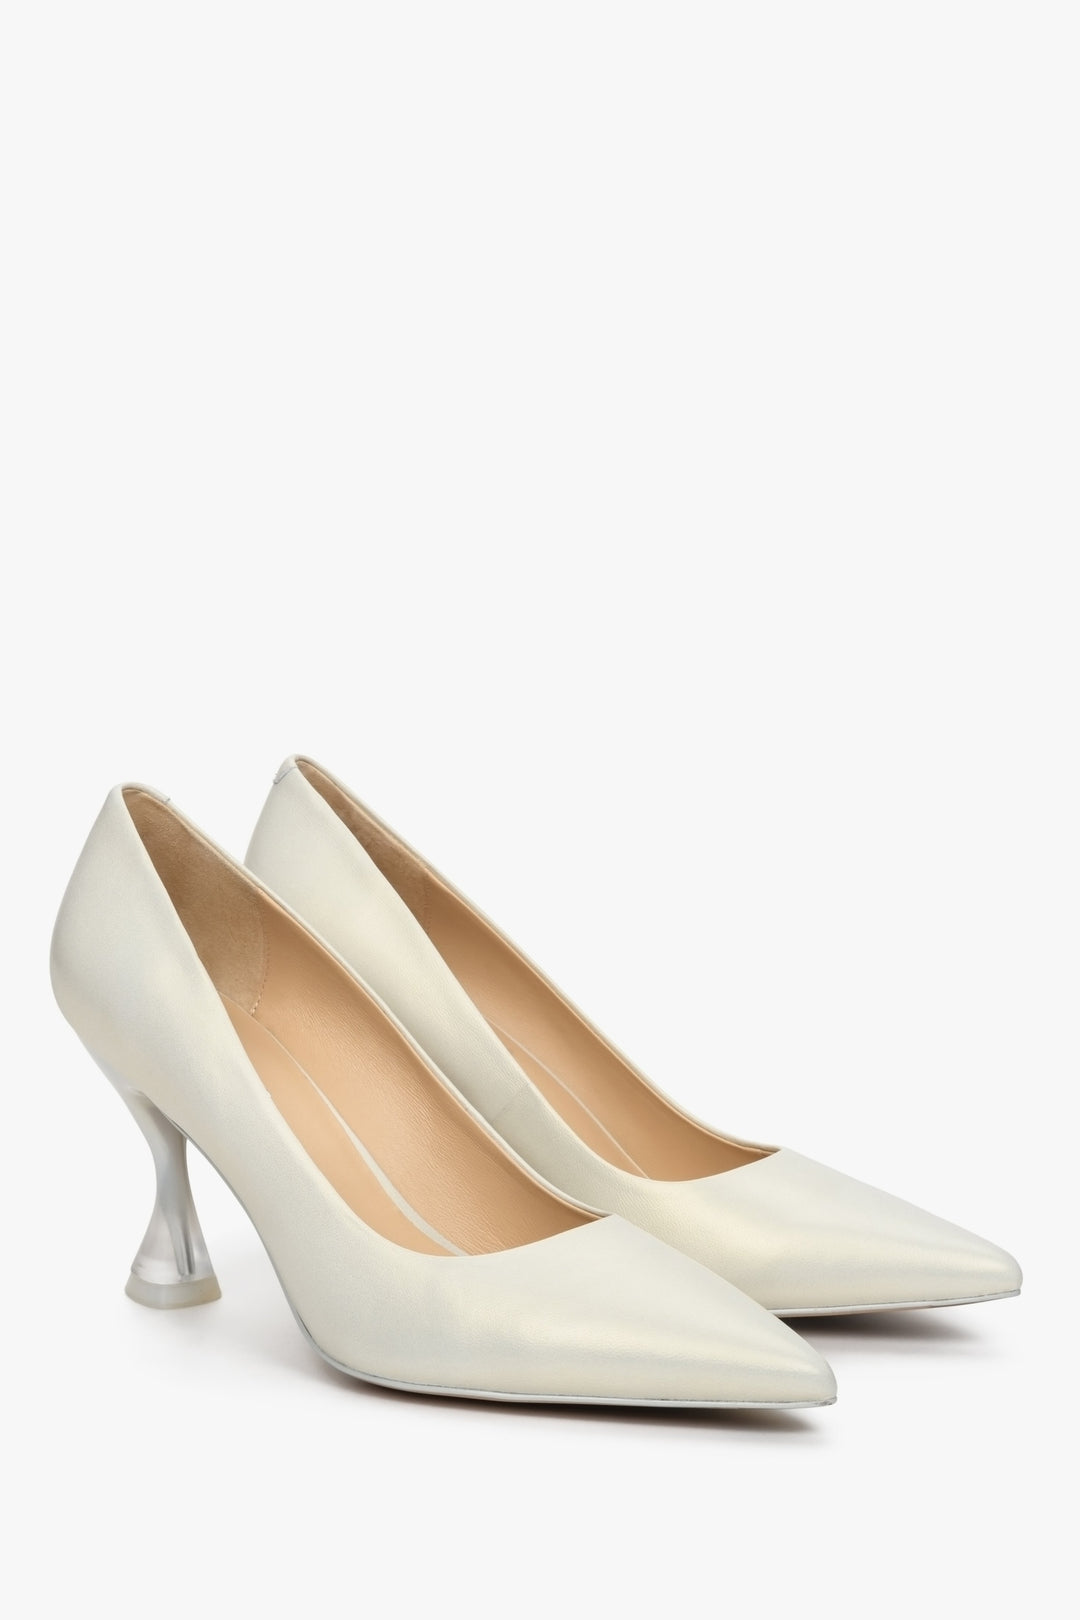 Women's pearlescent pointed high-heeled pumps - presentation of the front and side of the shoes.